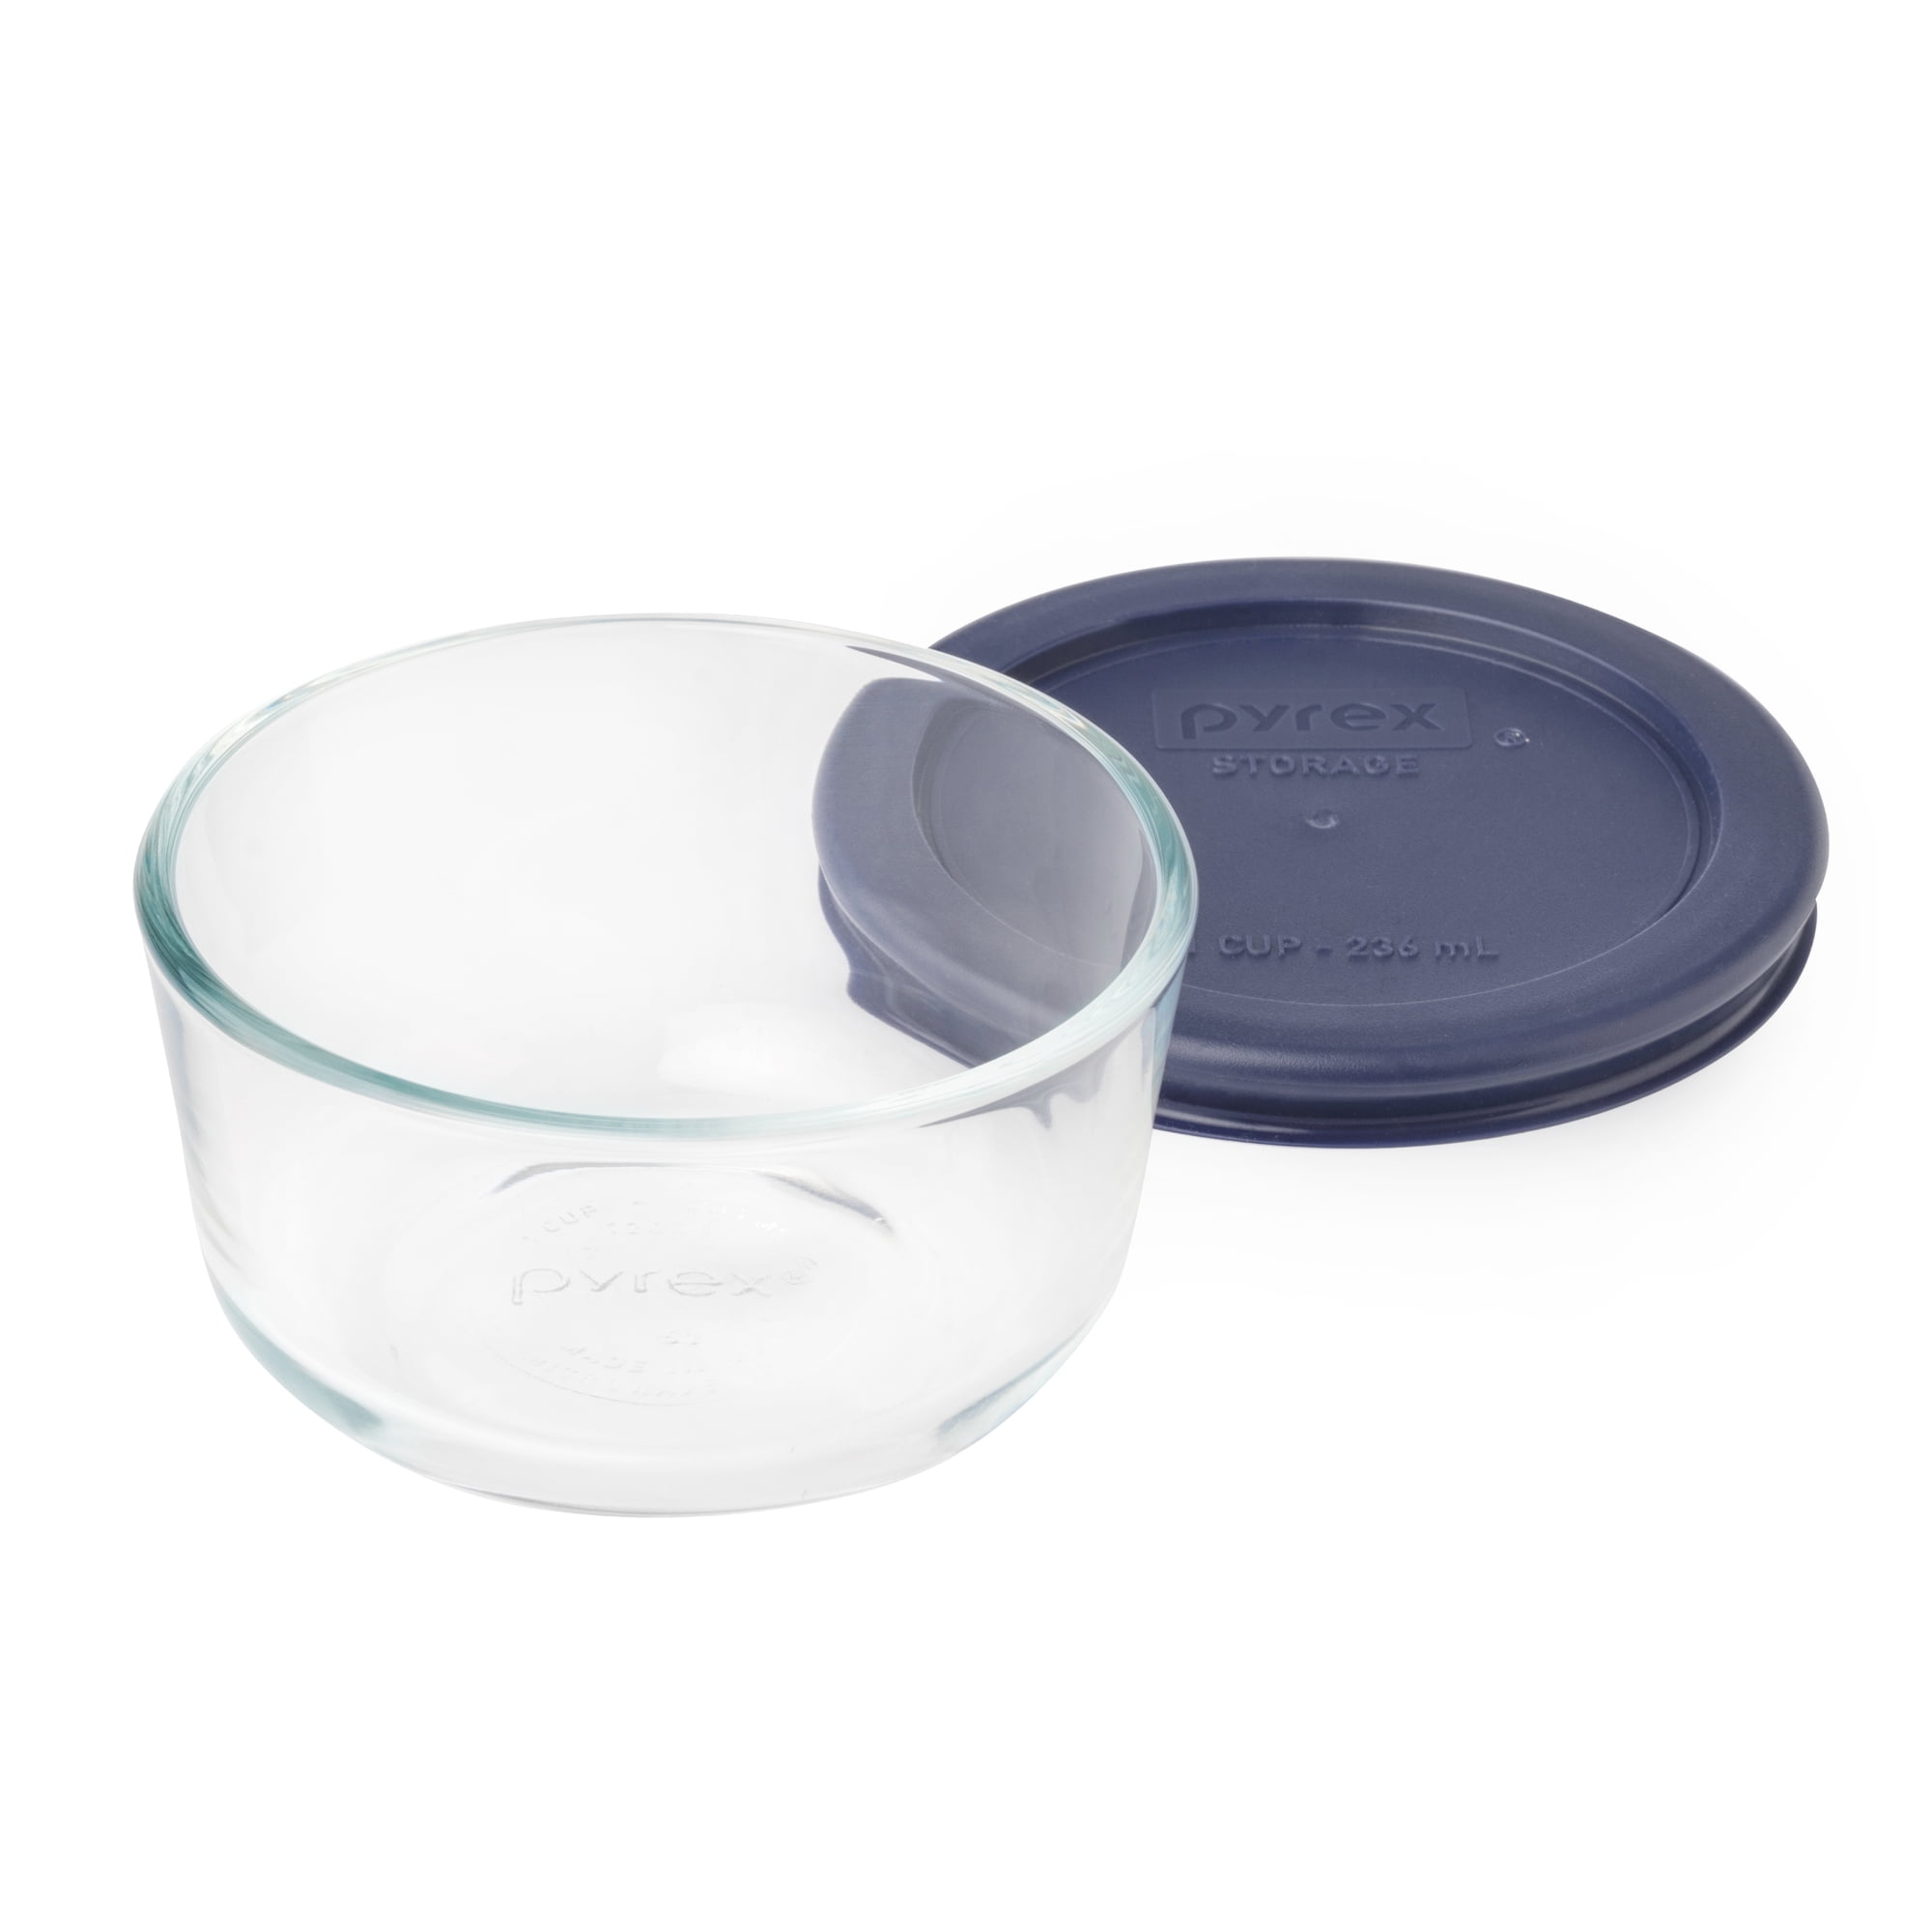  Pyrex Simply Store 10 Piece Set with Colored Lids : Home &  Kitchen